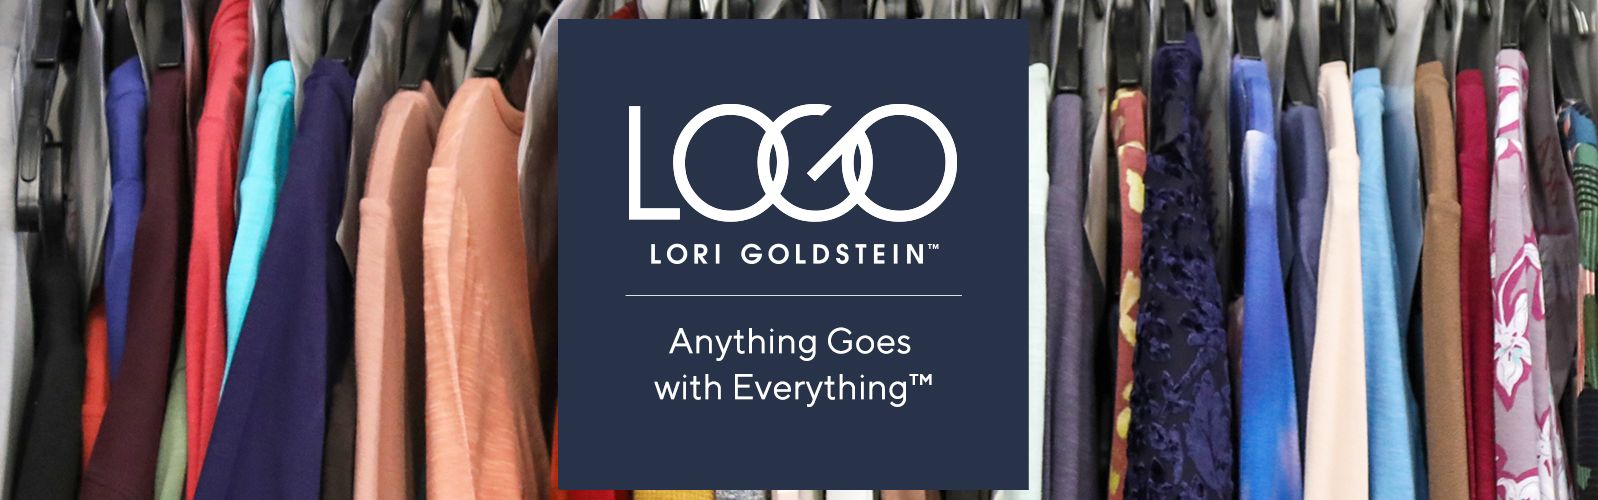 LOGO by Lori Goldstein - Anything Goes with Everything